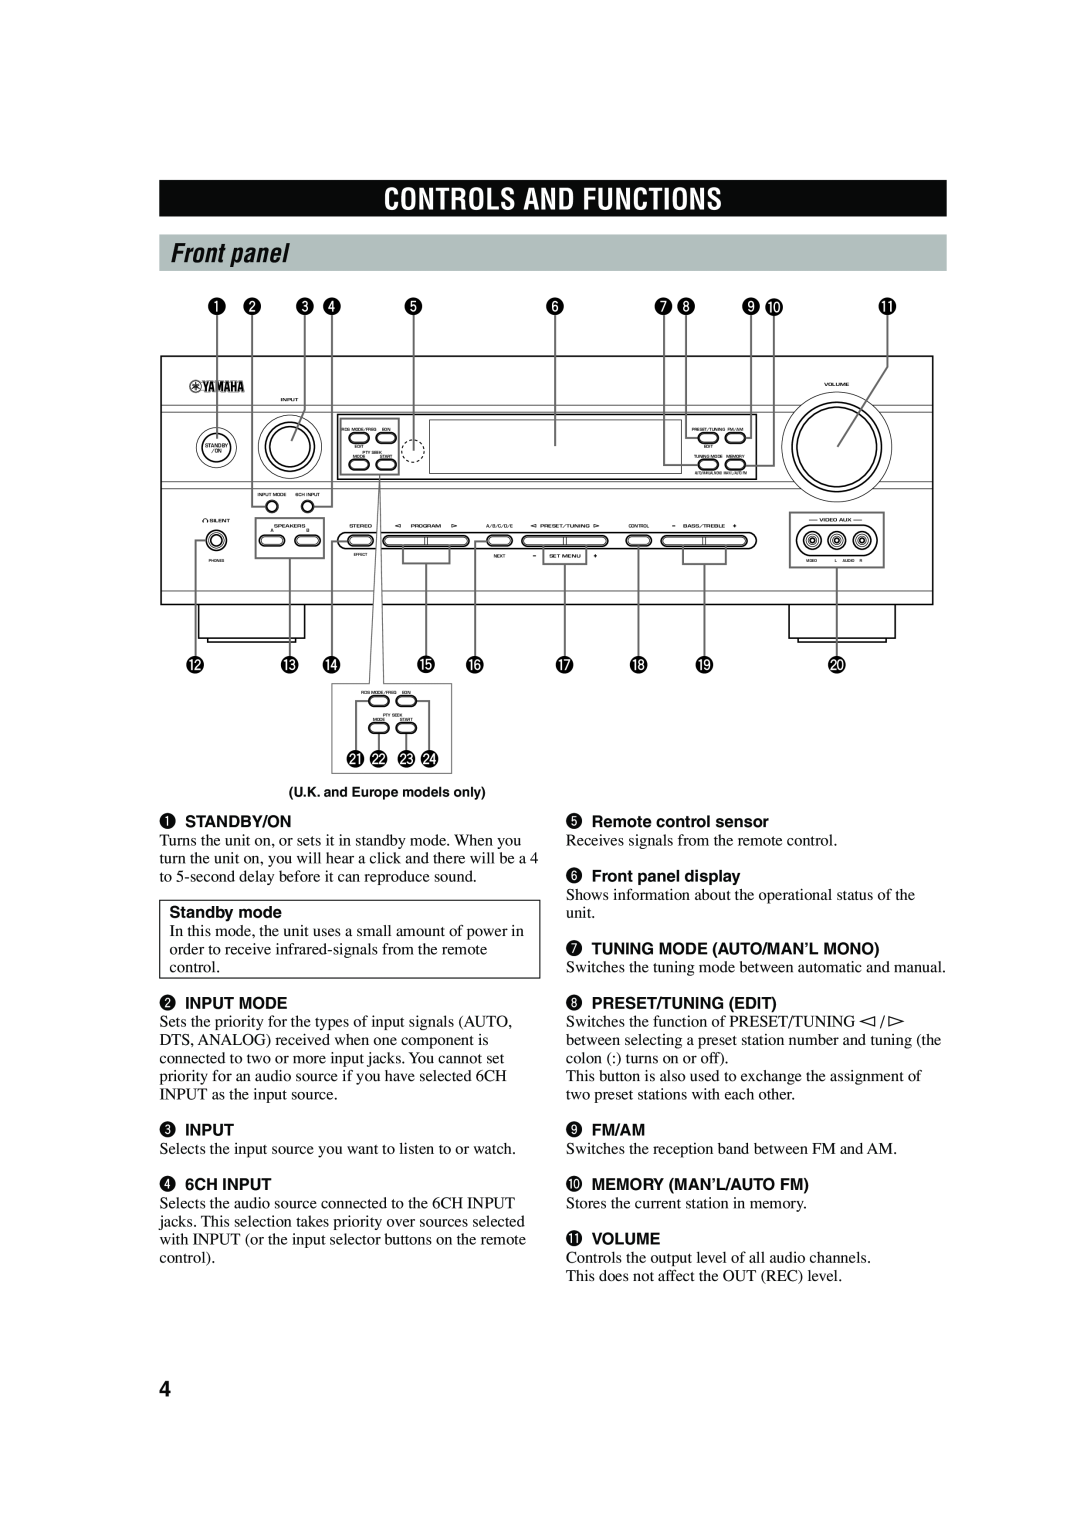 Yamaha HTR-5640 owner manual Controls And Functions, Front panel, a s d f 